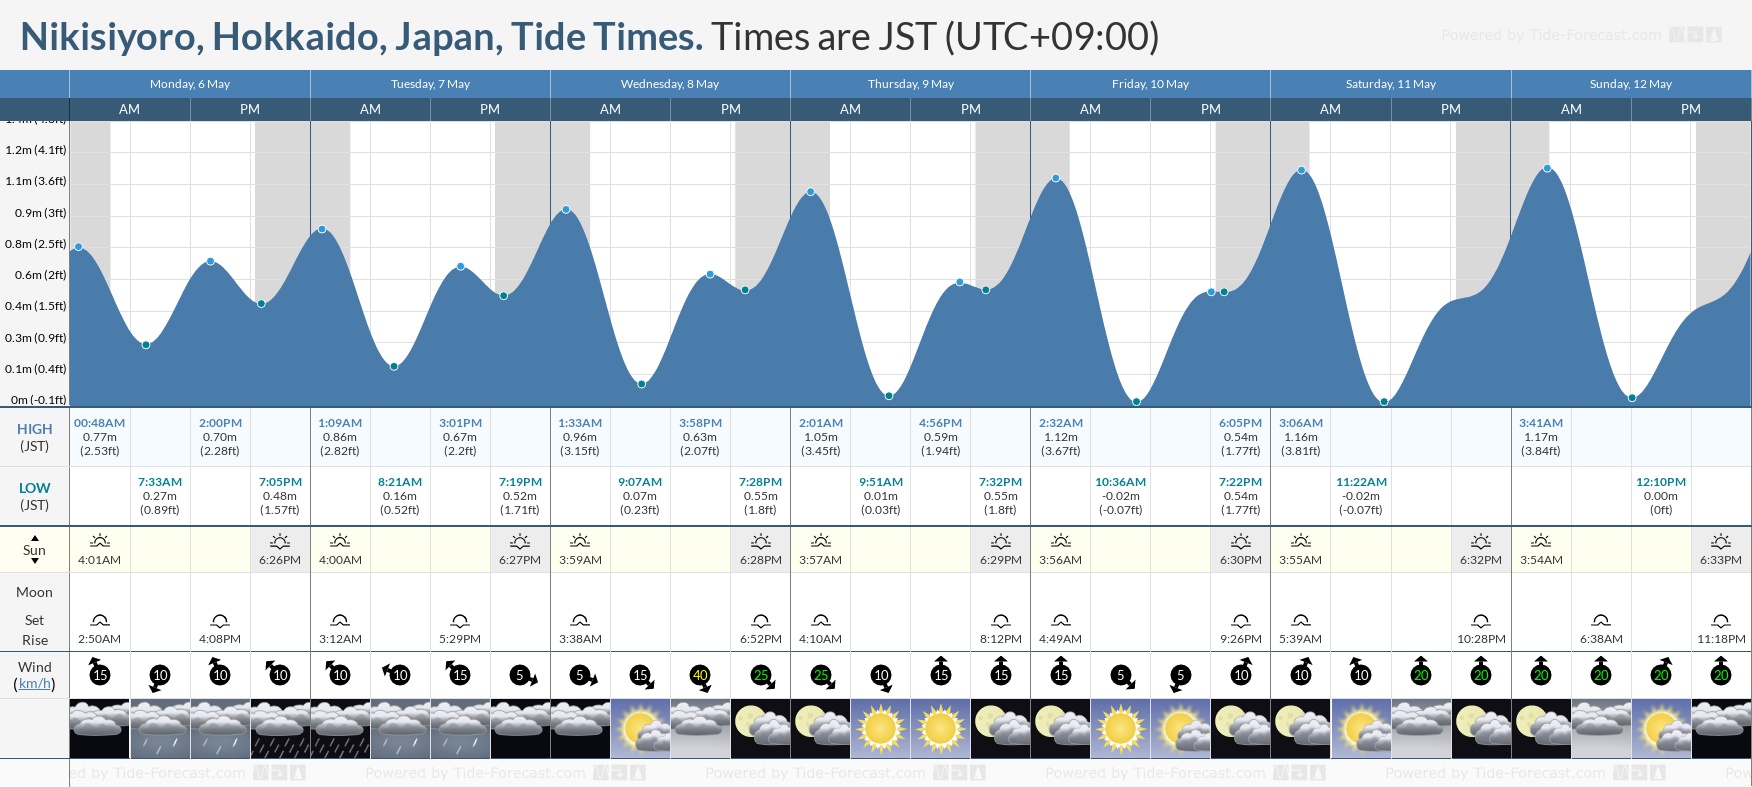 Nikisiyoro, Hokkaido, Japan Tide Chart including high and low tide tide times for the next 7 days